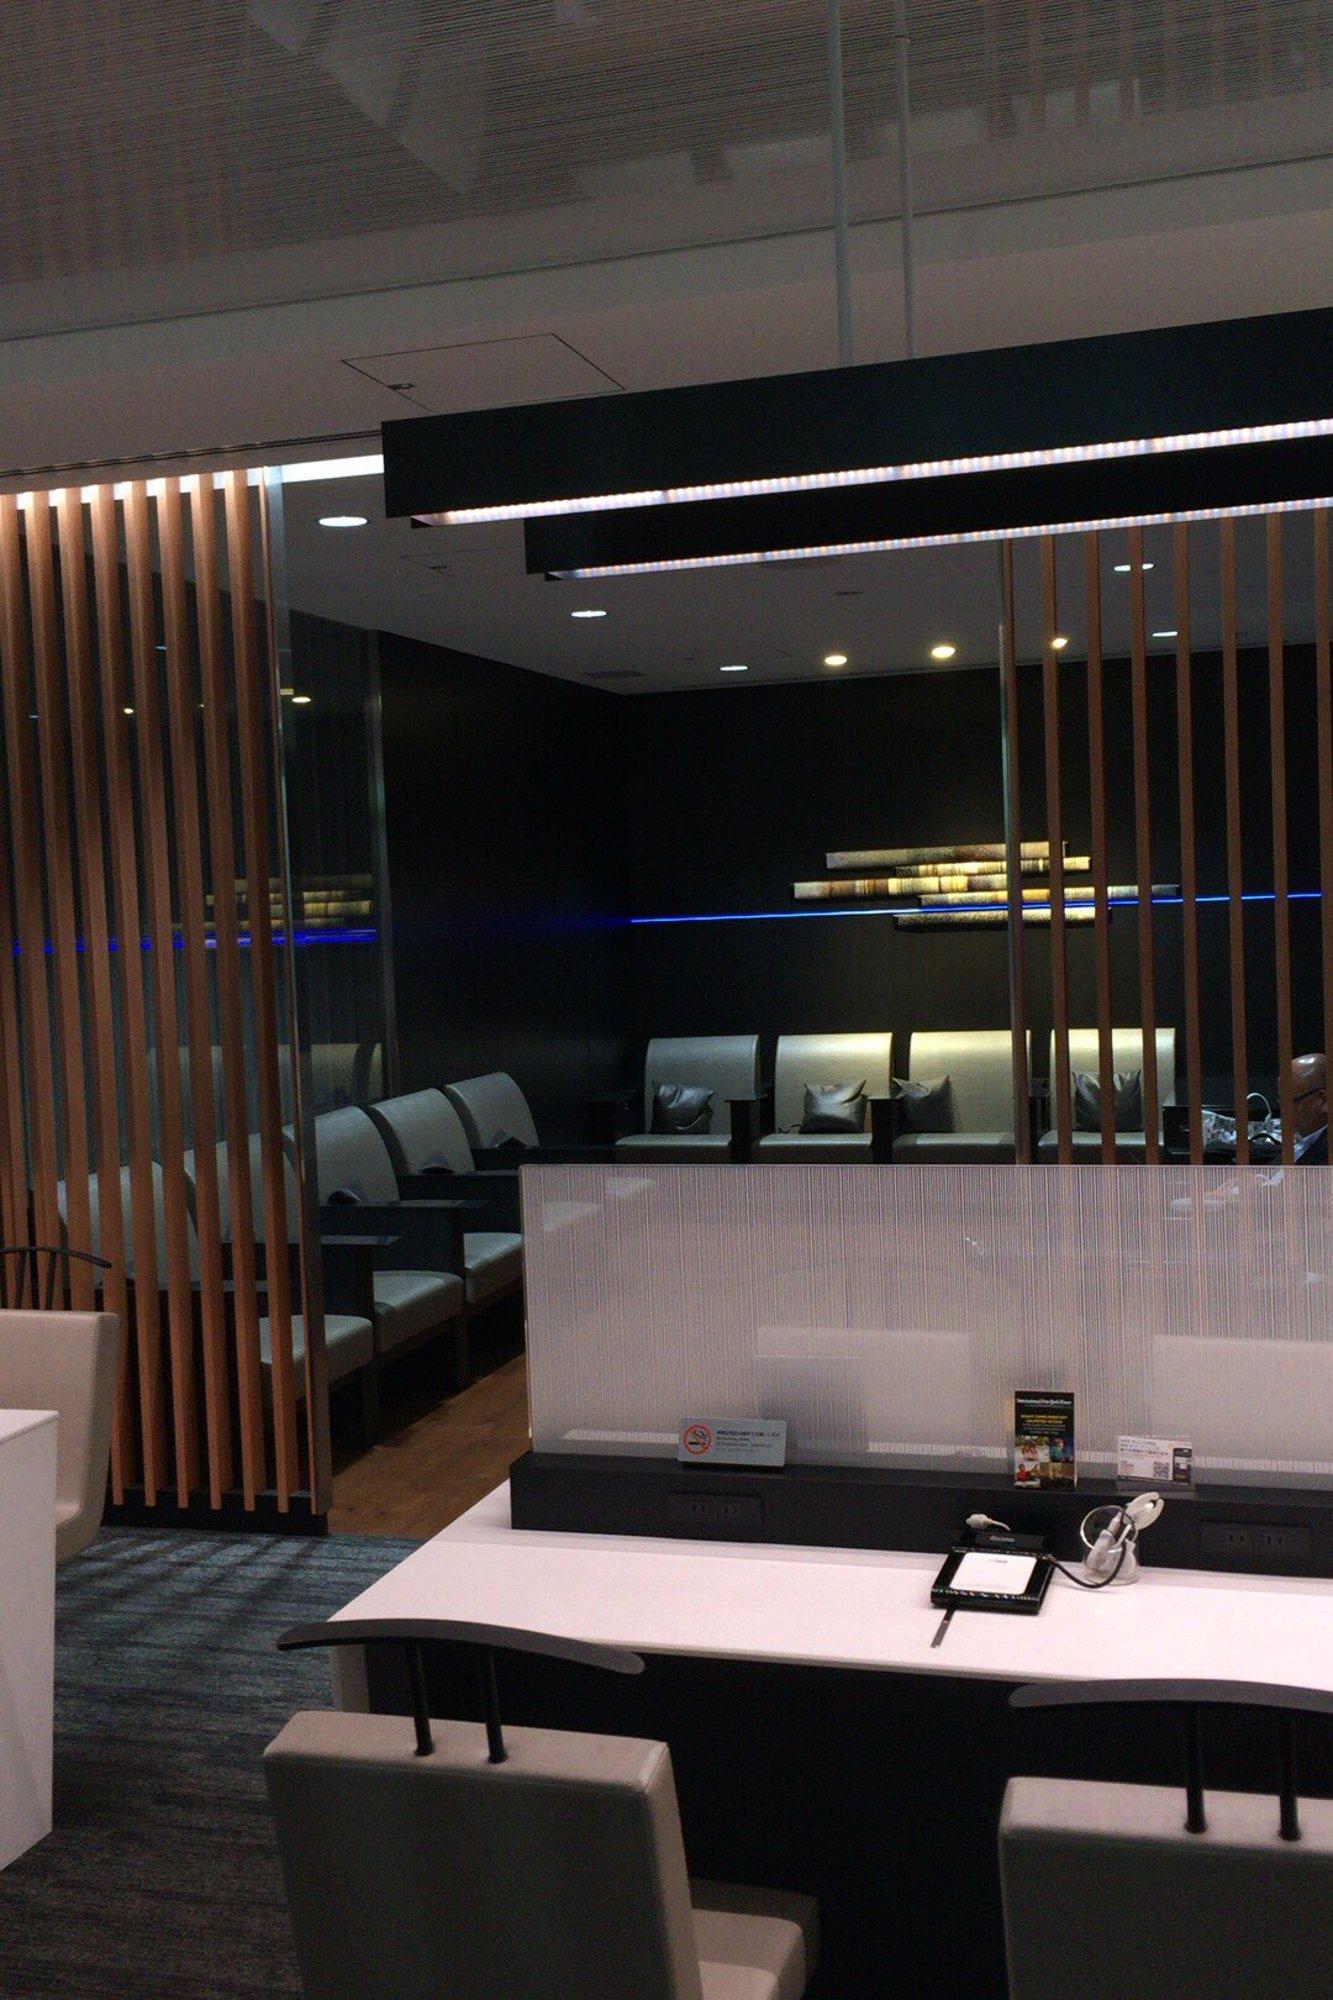 All Nippon Airways ANA Lounge image 8 of 9